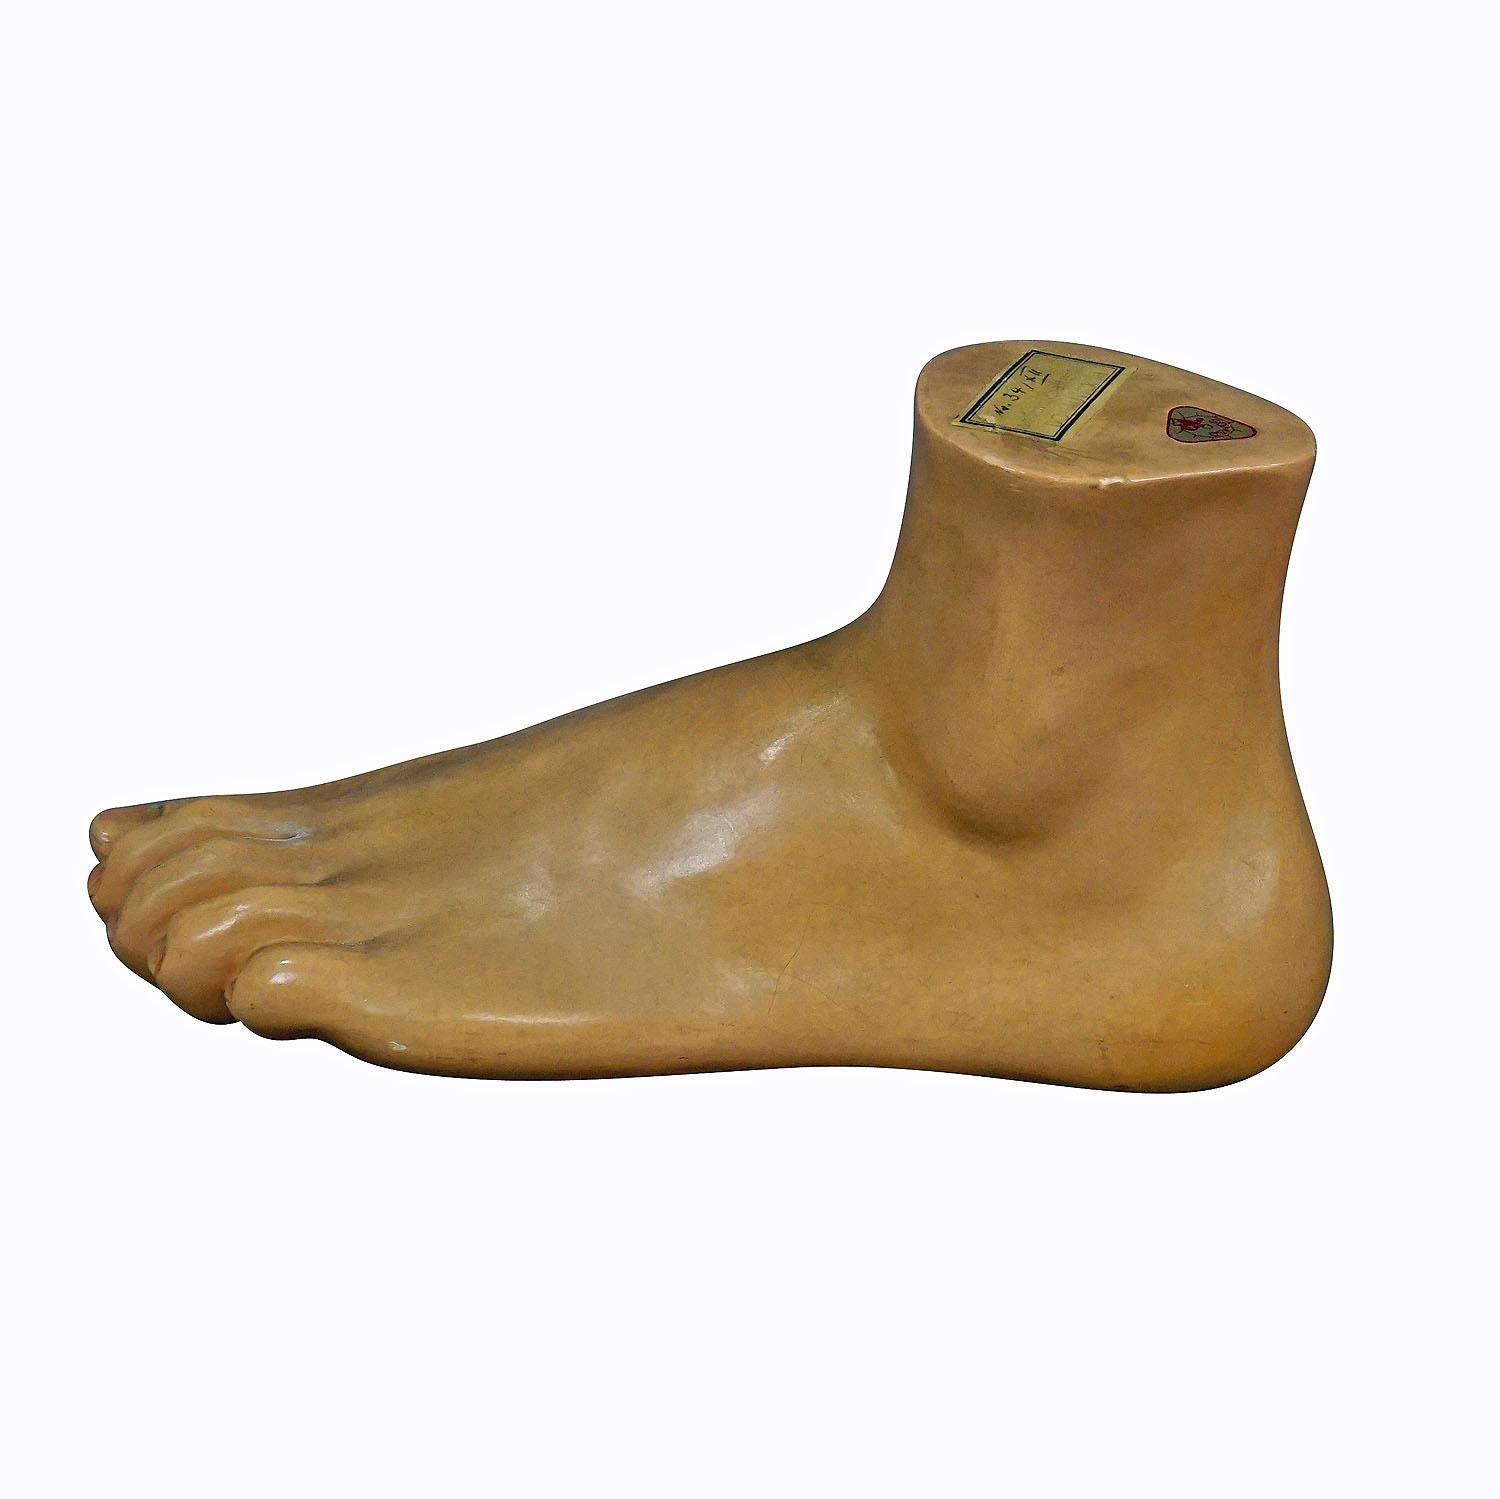 Antique 3D Anatomical Foot Model Made by SOMSO ca. 1930

A delicately handpainted and highly detailed anatomical foot model for class. It is made of papier mâché and plaster, manufactured by SOMSO, Germany ca. 1930. (manufacturer paper lable and